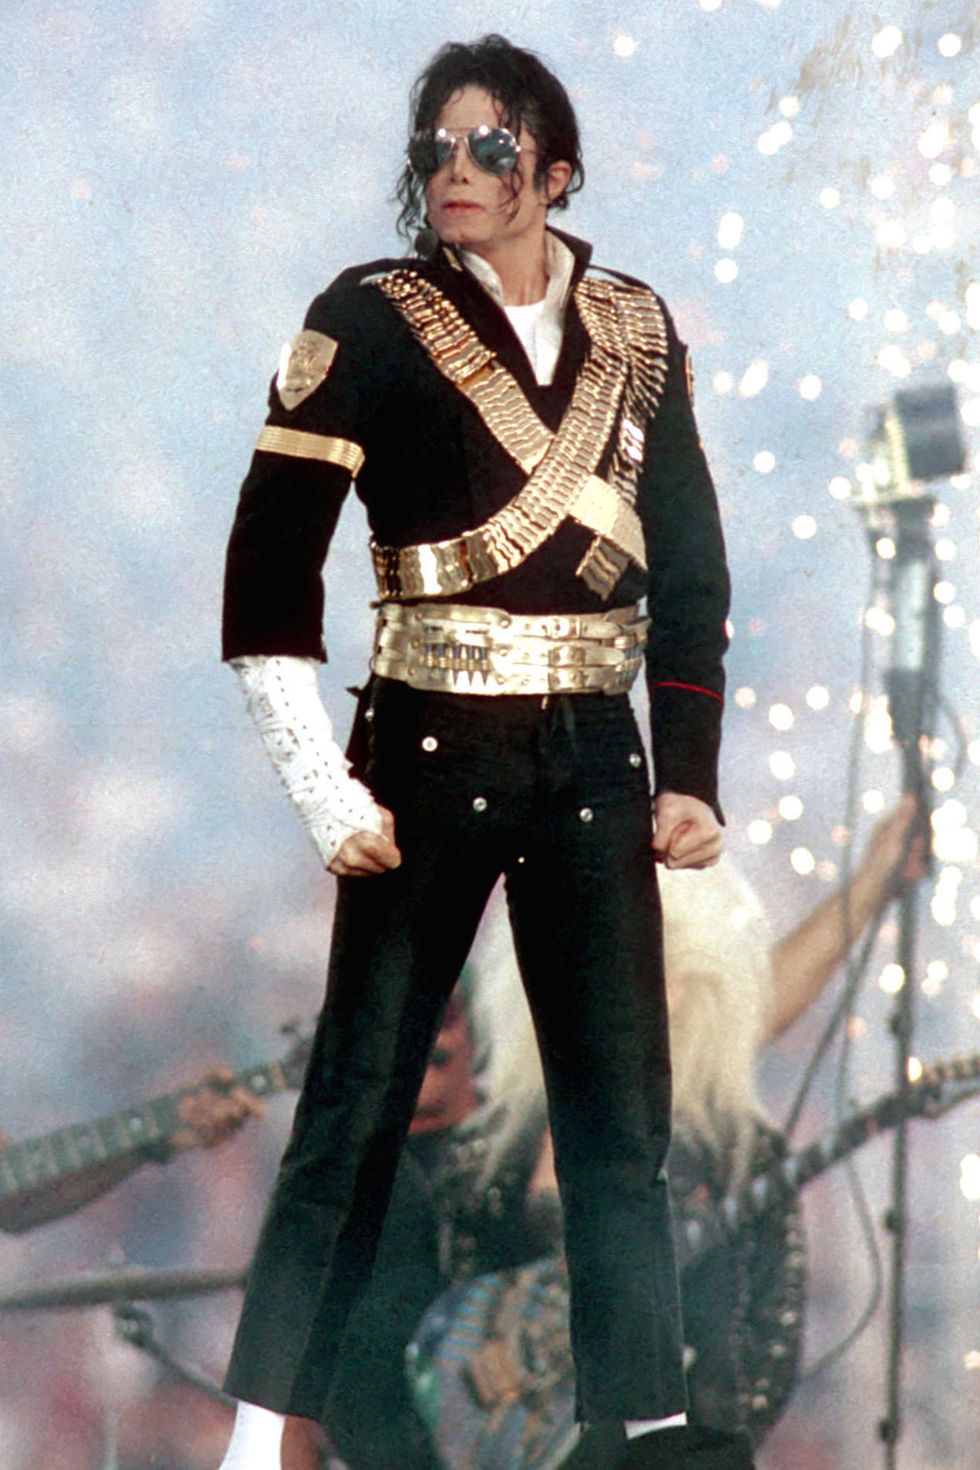 Best Super Bowl Halftime Show outfits ever